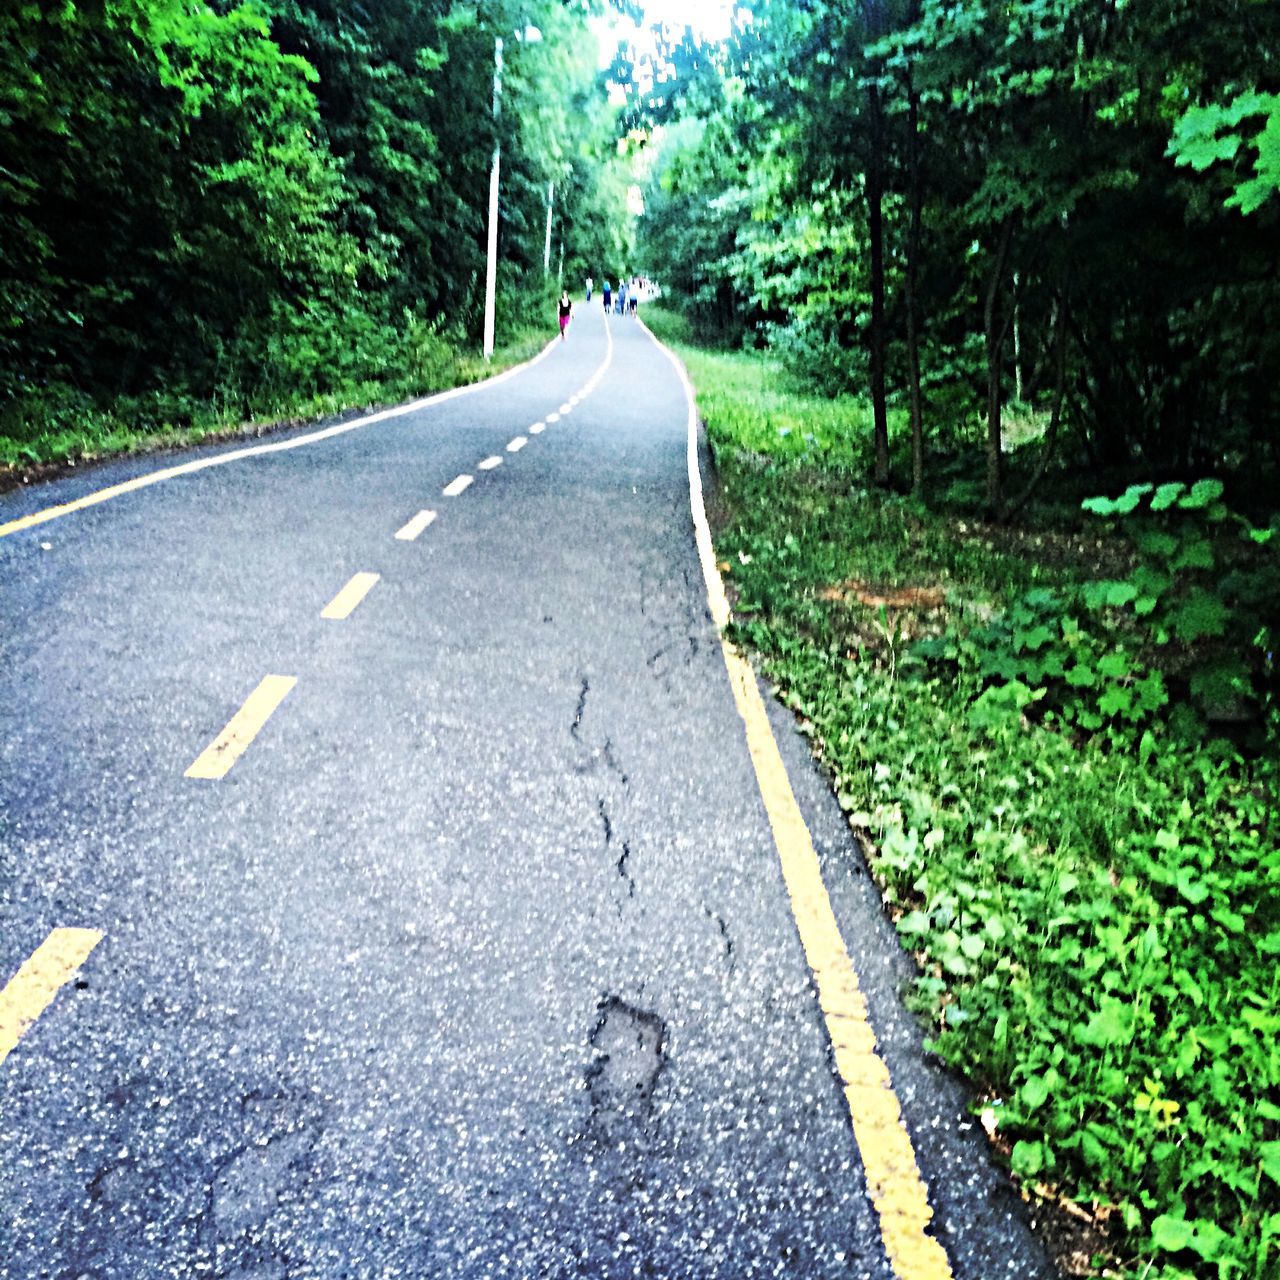 the way forward, transportation, road, diminishing perspective, road marking, tree, vanishing point, asphalt, country road, empty road, street, growth, double yellow line, nature, day, tranquility, forest, outdoors, no people, long